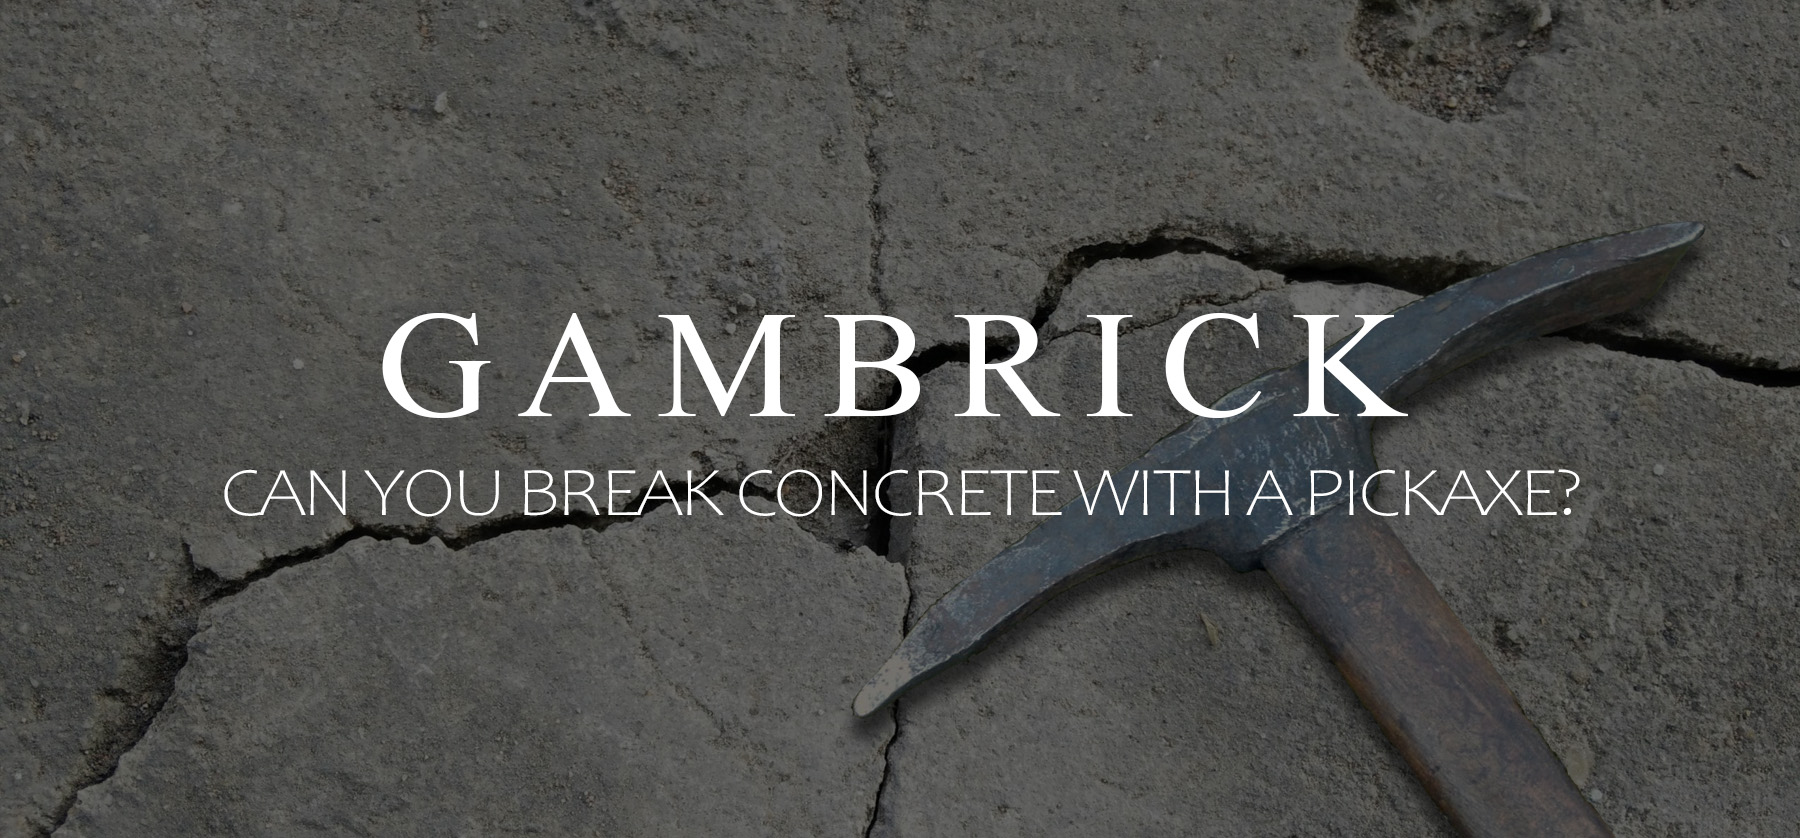 can you break concrete with a pickaxe banner